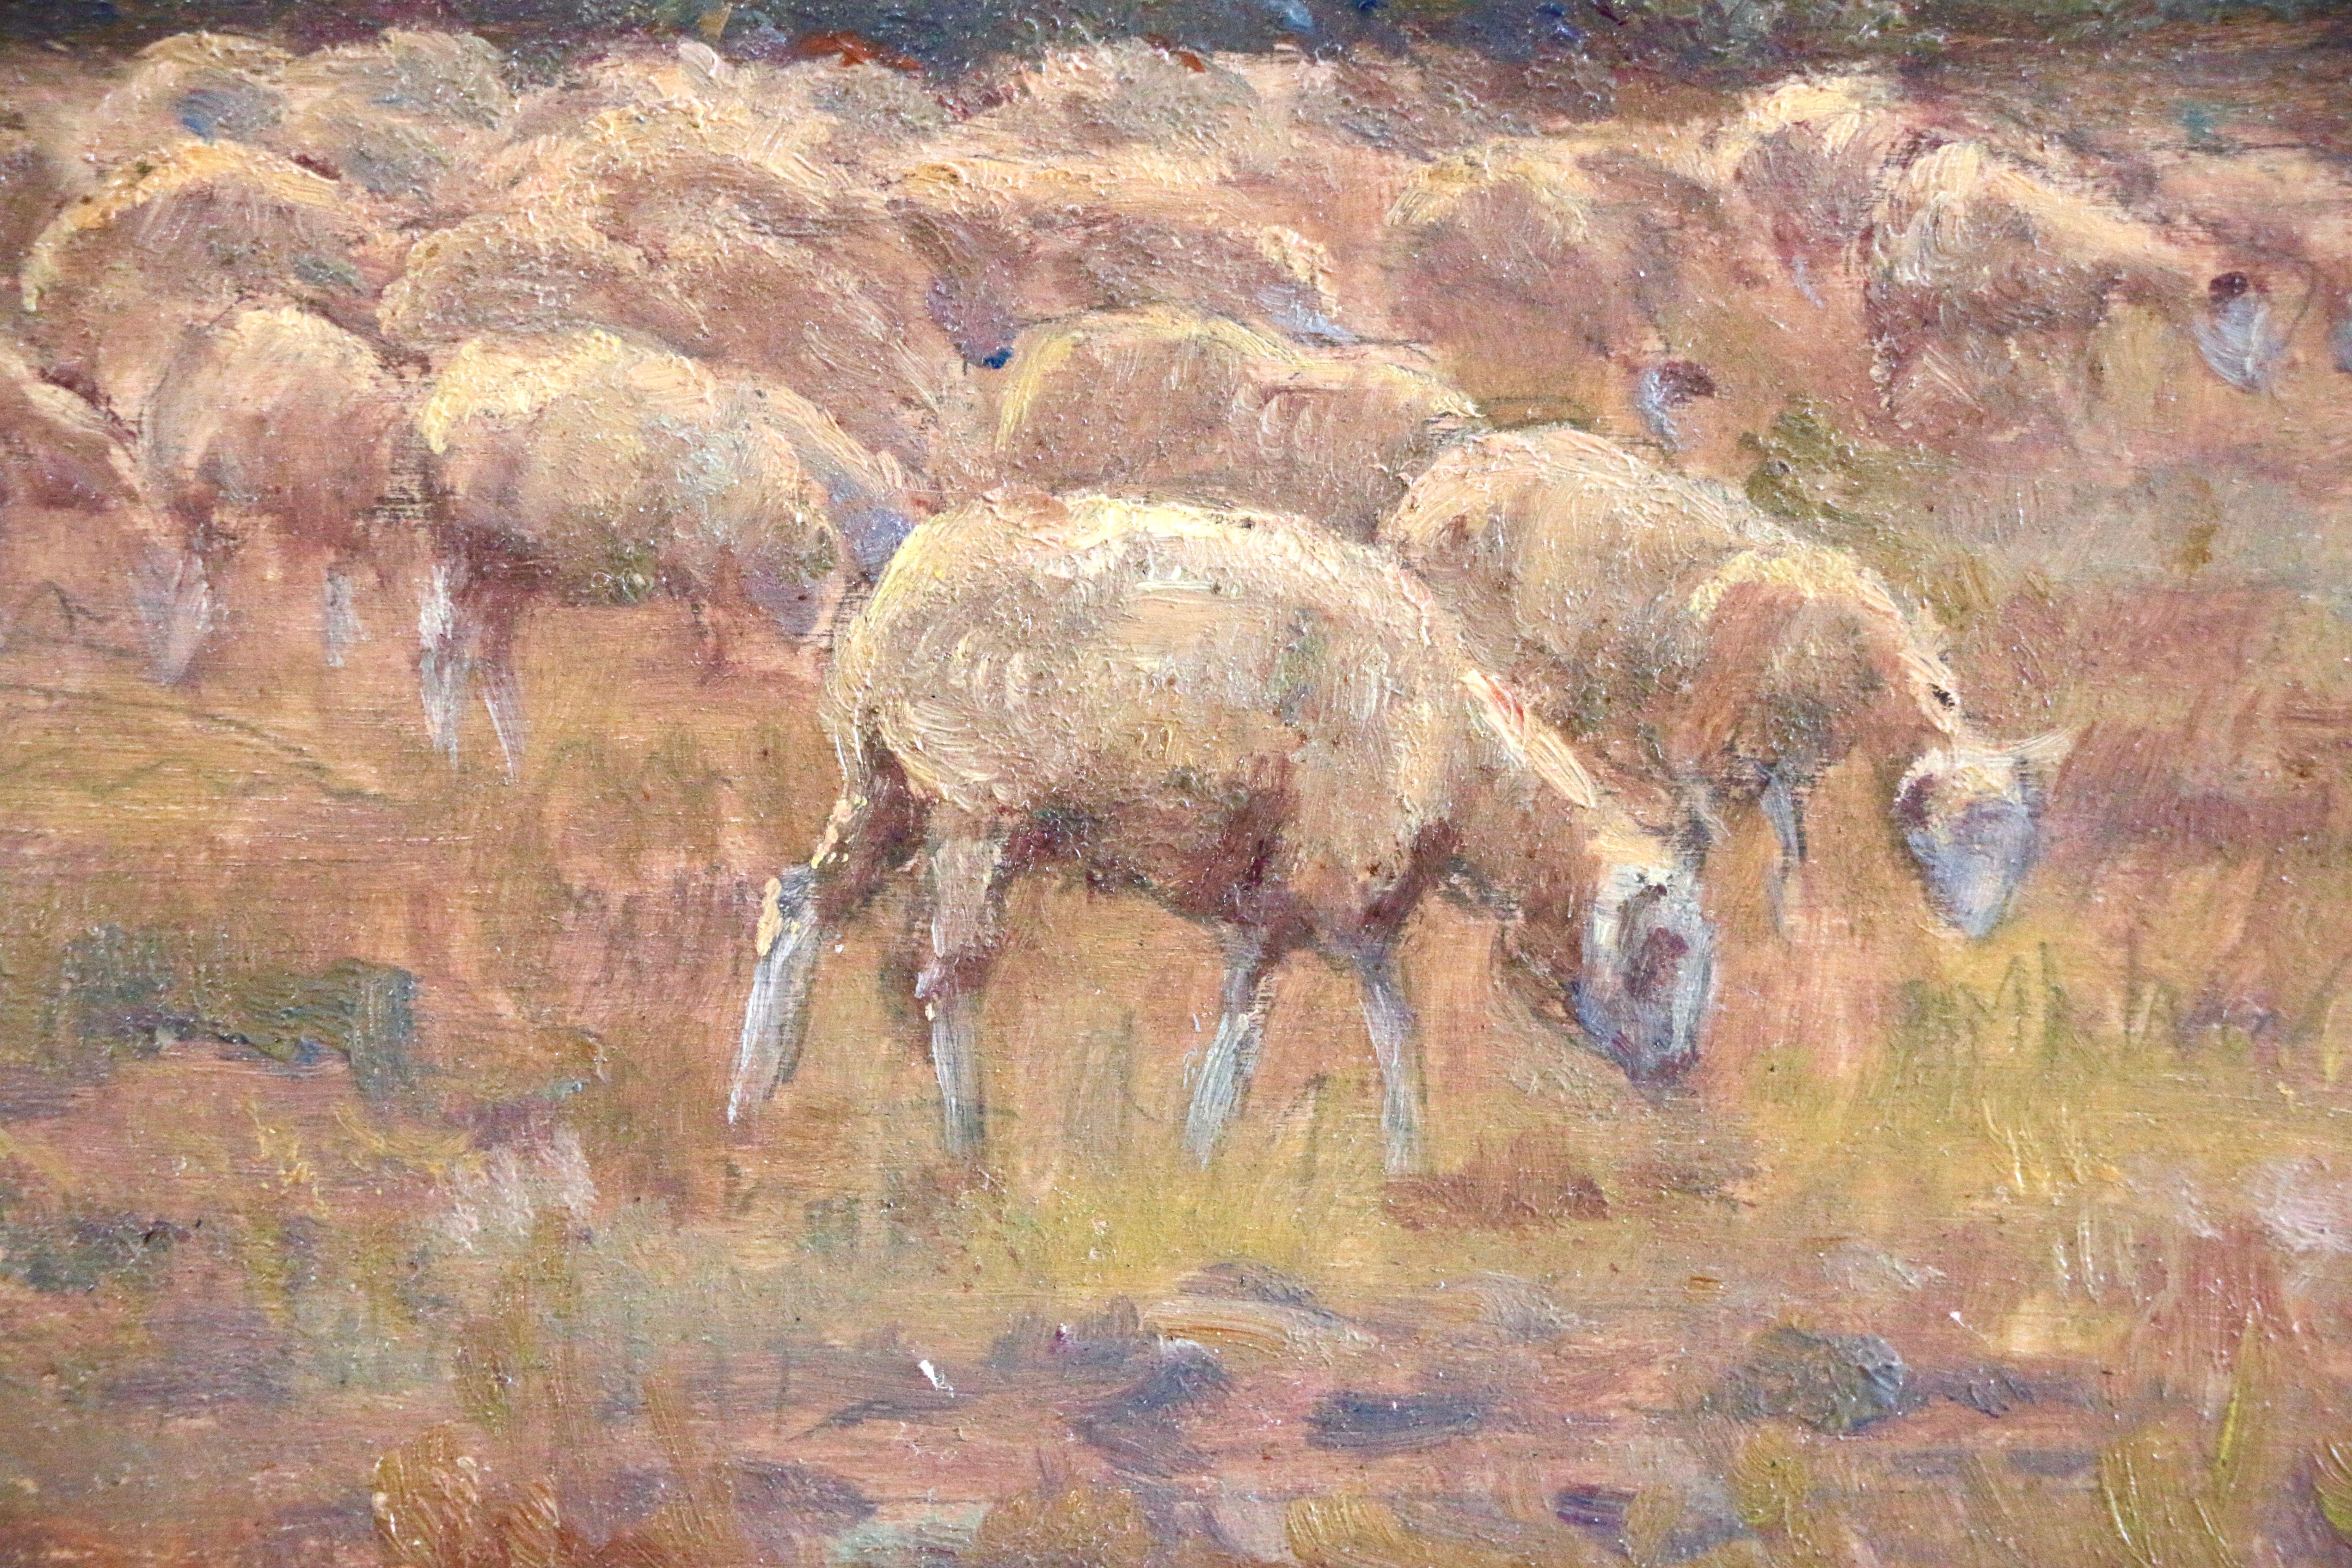 Shepherd and his Flock - 19th Century Oil, Sheep & Figure in Landscape by Duhem (Impressionismus), Painting, von Henri Duhem